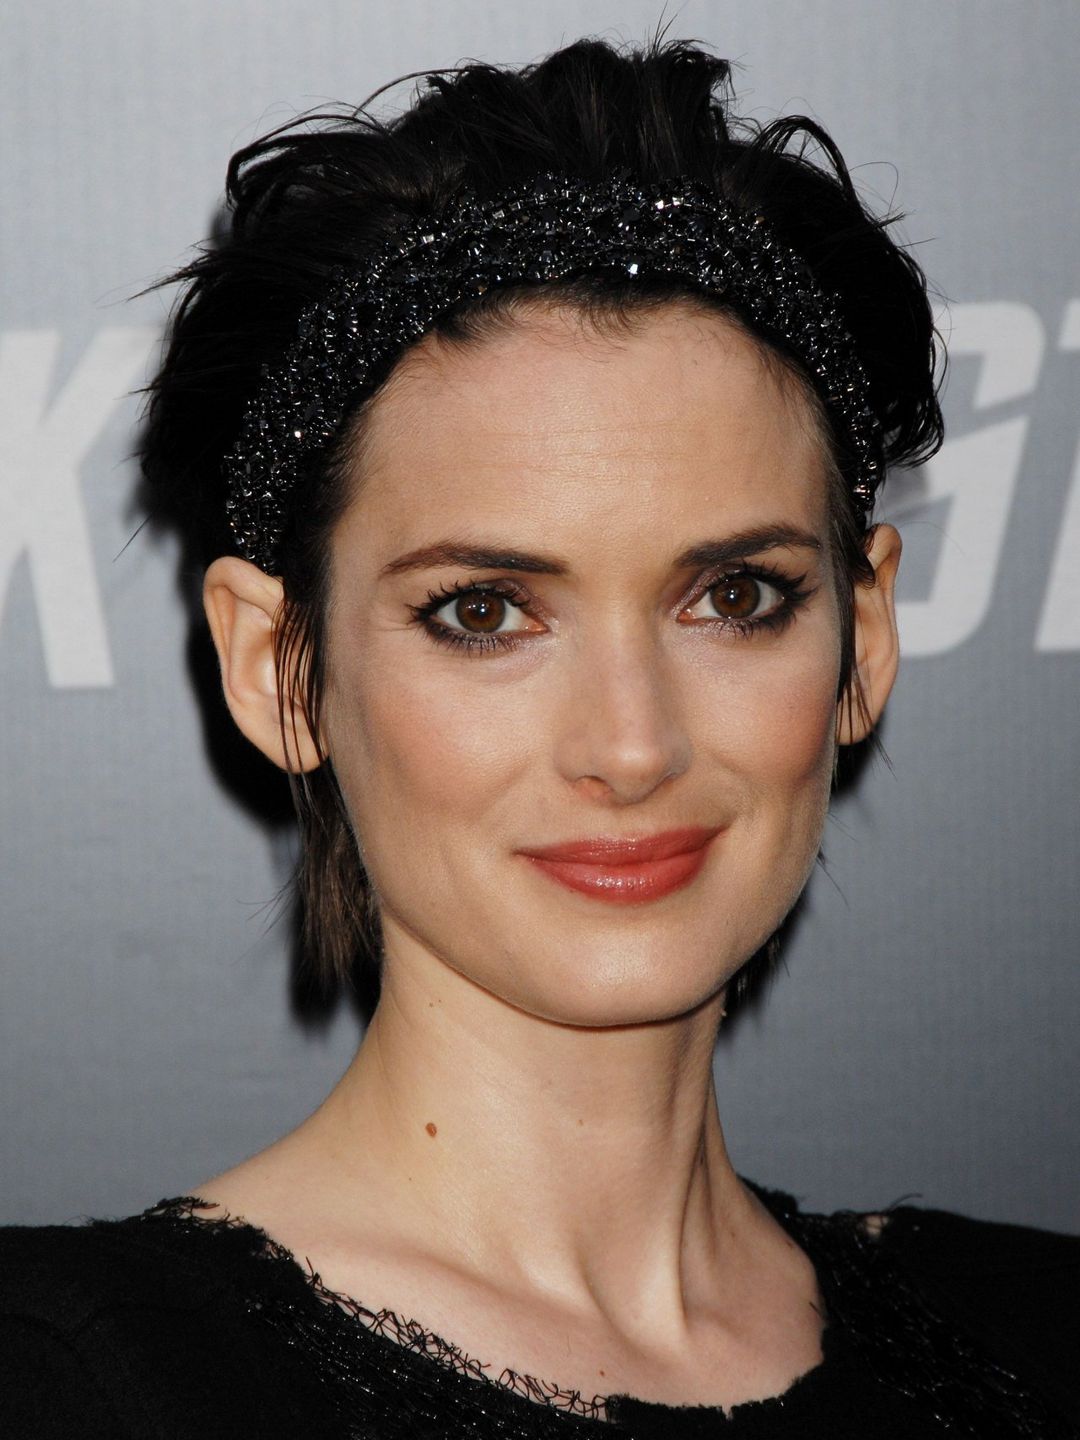 Winona Ryder unphotoshopped pictures